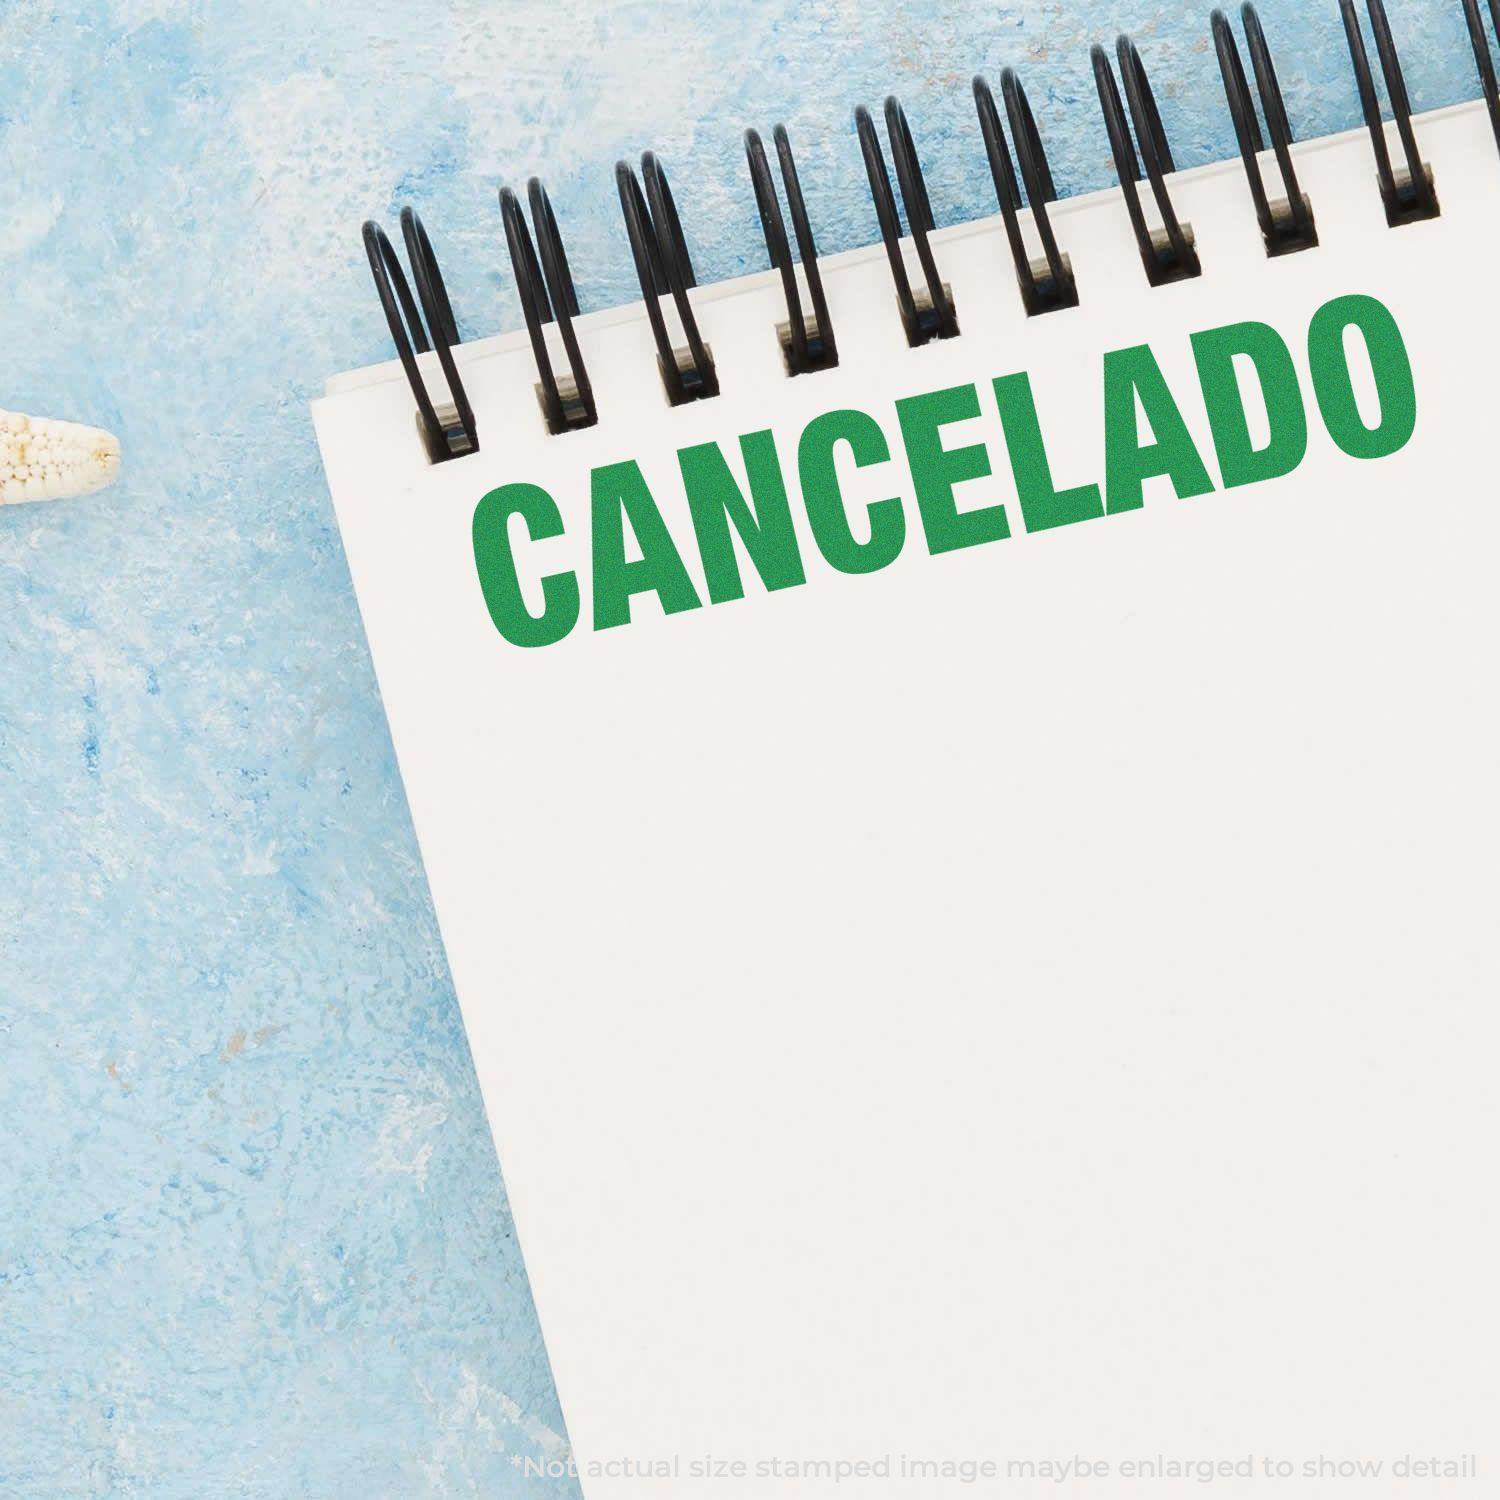 A self-inking stamp with a stamped image showing how the text "CANCELADO" is displayed after stamping.